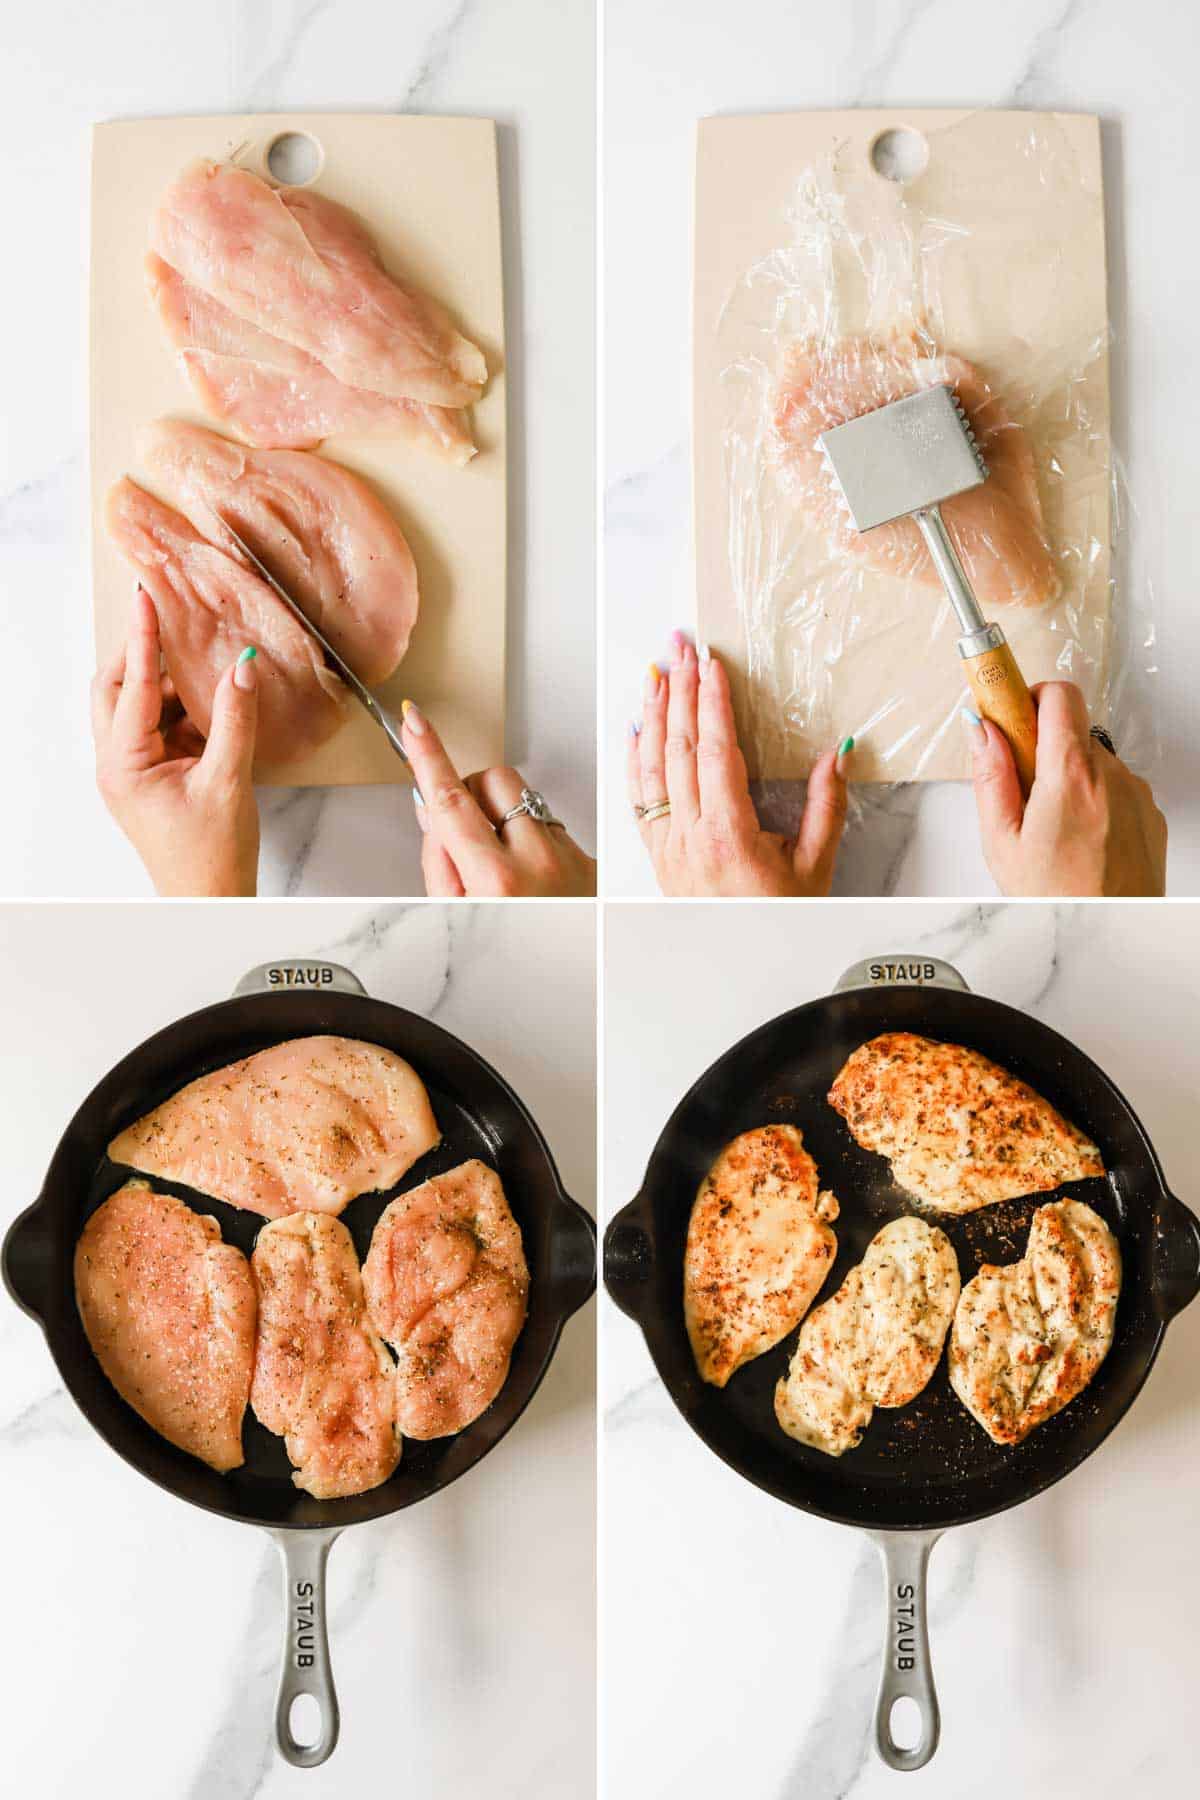 Four images showing shine being pounded and cooked in a skillet.